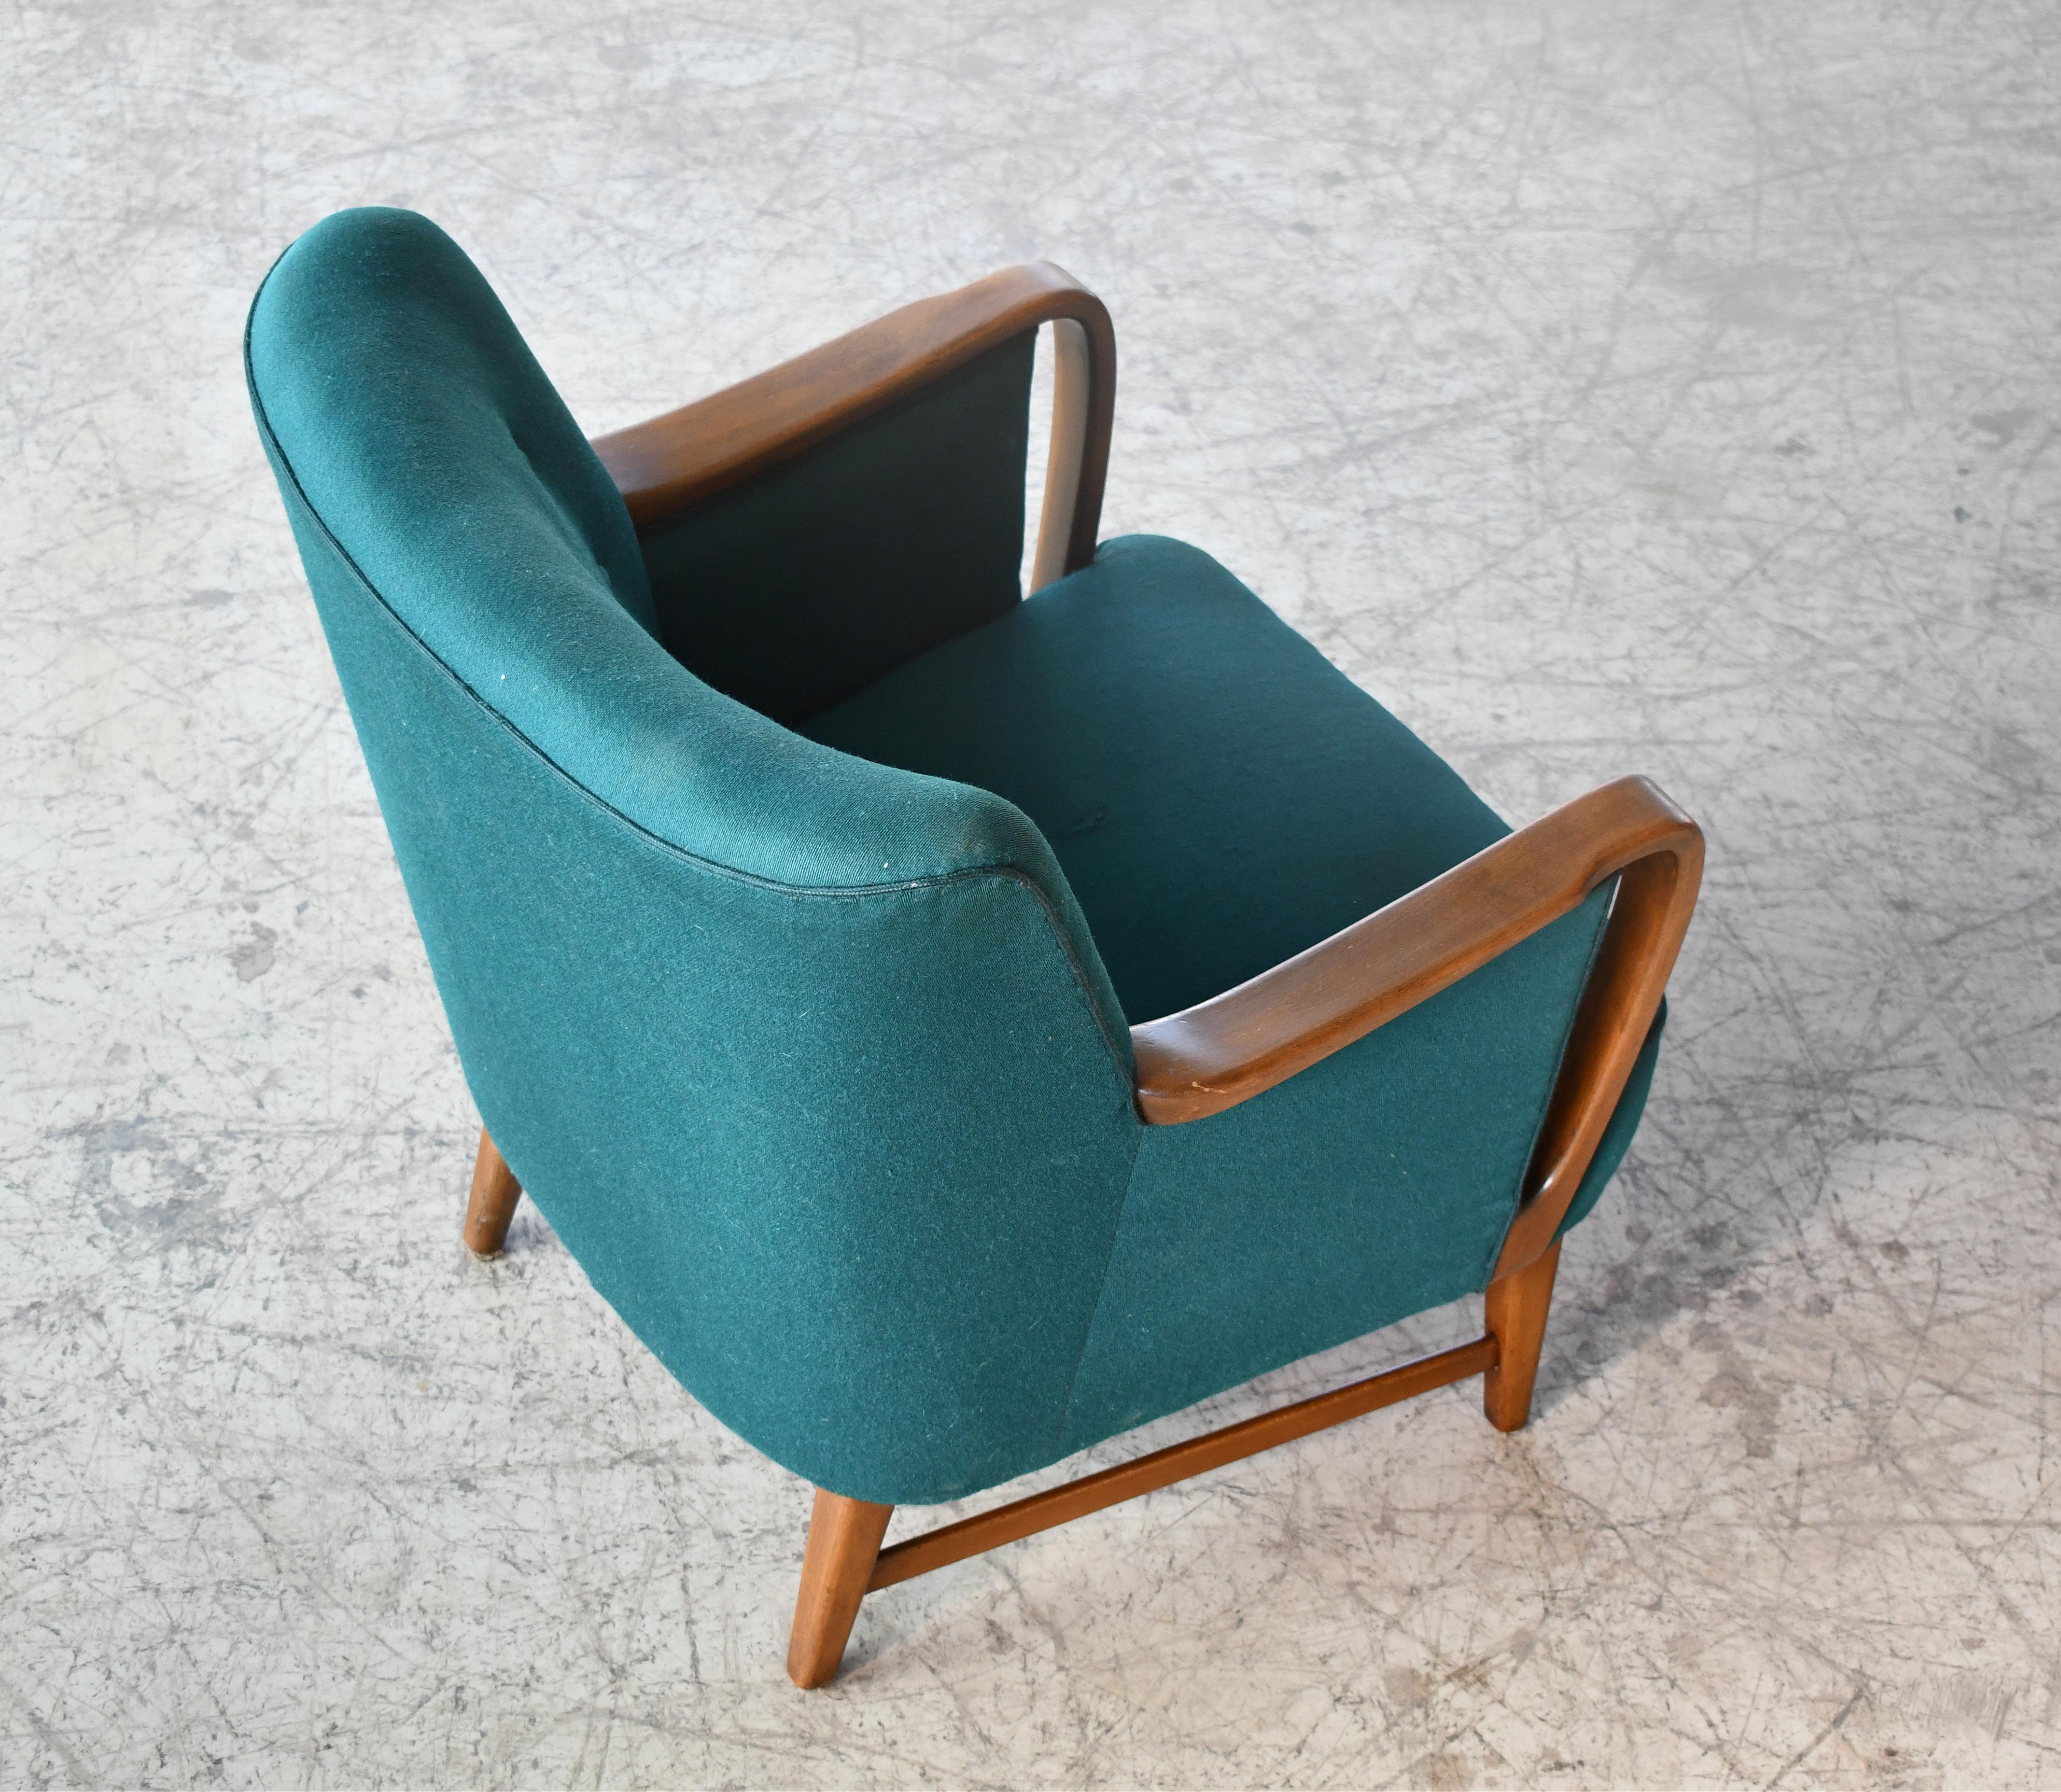 Midcentury Danish Lounge Chair in Oak and Wool by N.A. Jorgensen  In Good Condition For Sale In Bridgeport, CT